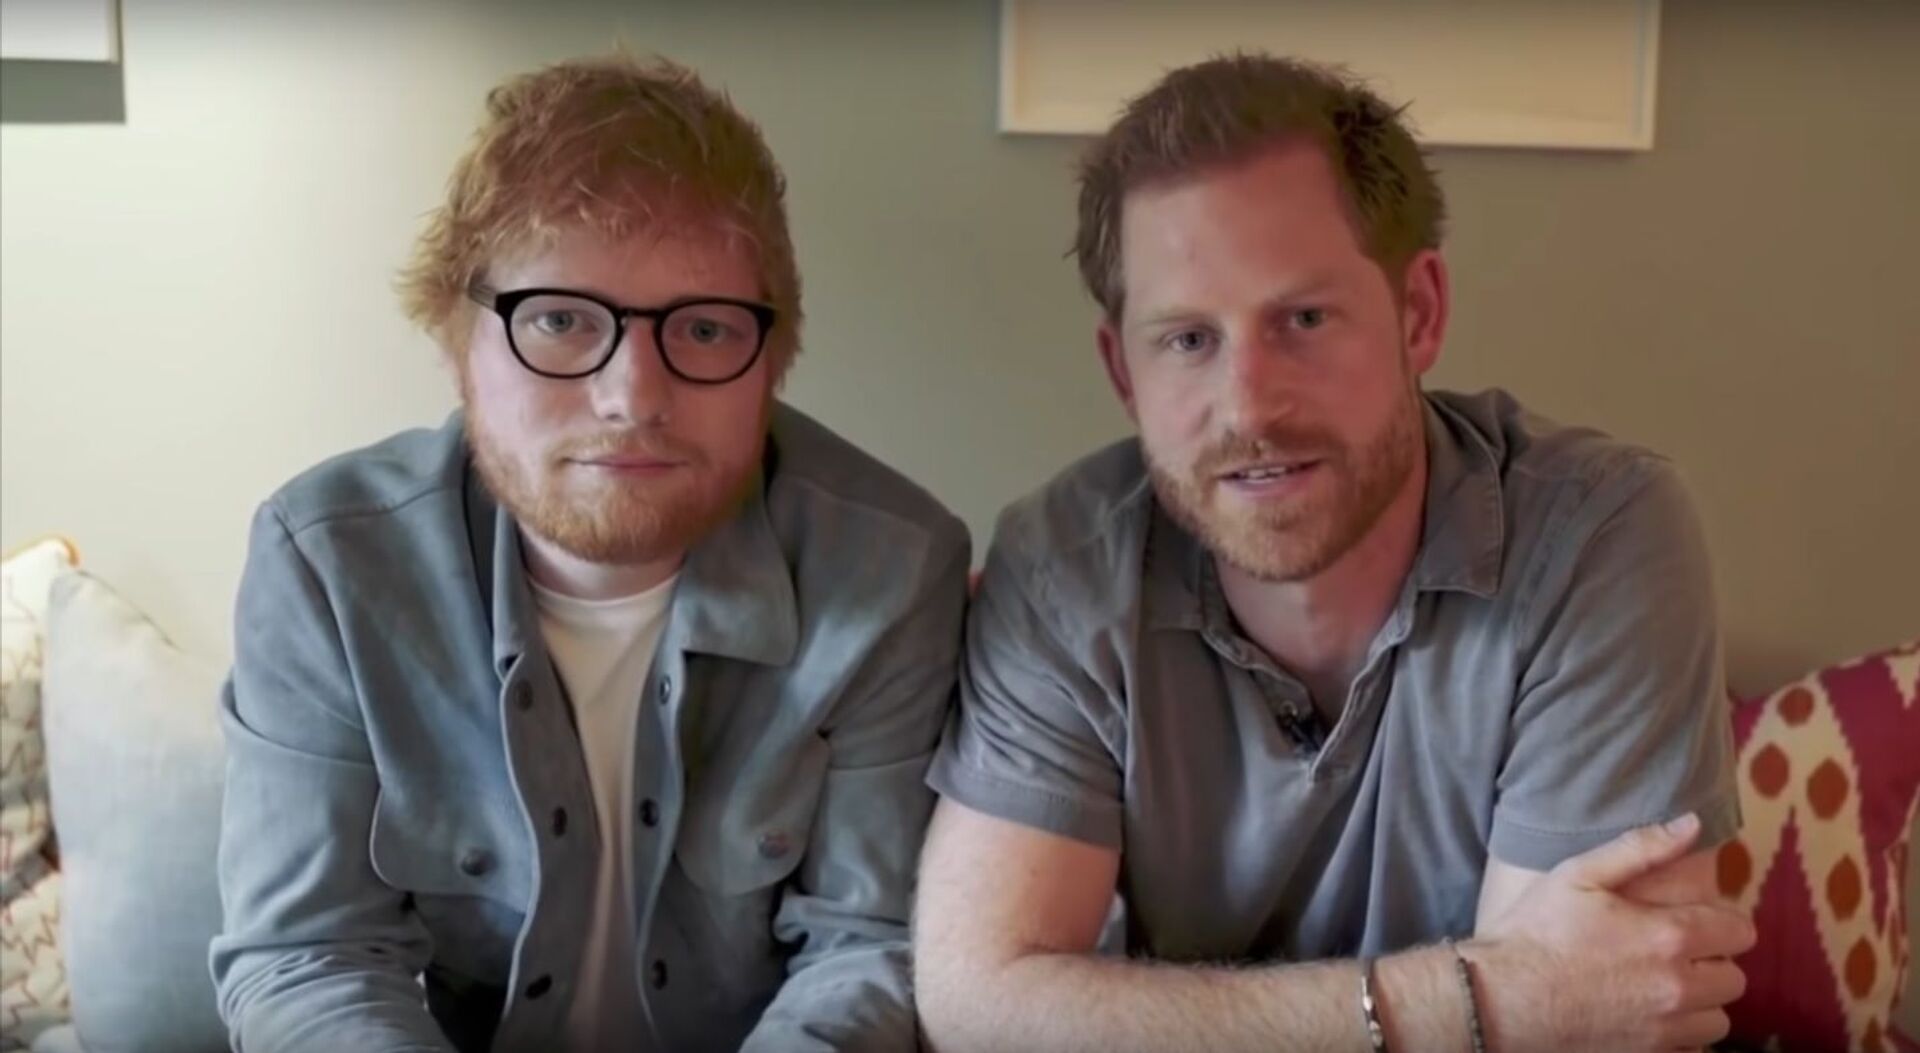 Prince Harry and Ed Sheeran Team up in Hilarious Sketch for World Mental Health Day - Sputnik International, 1920, 16.03.2022